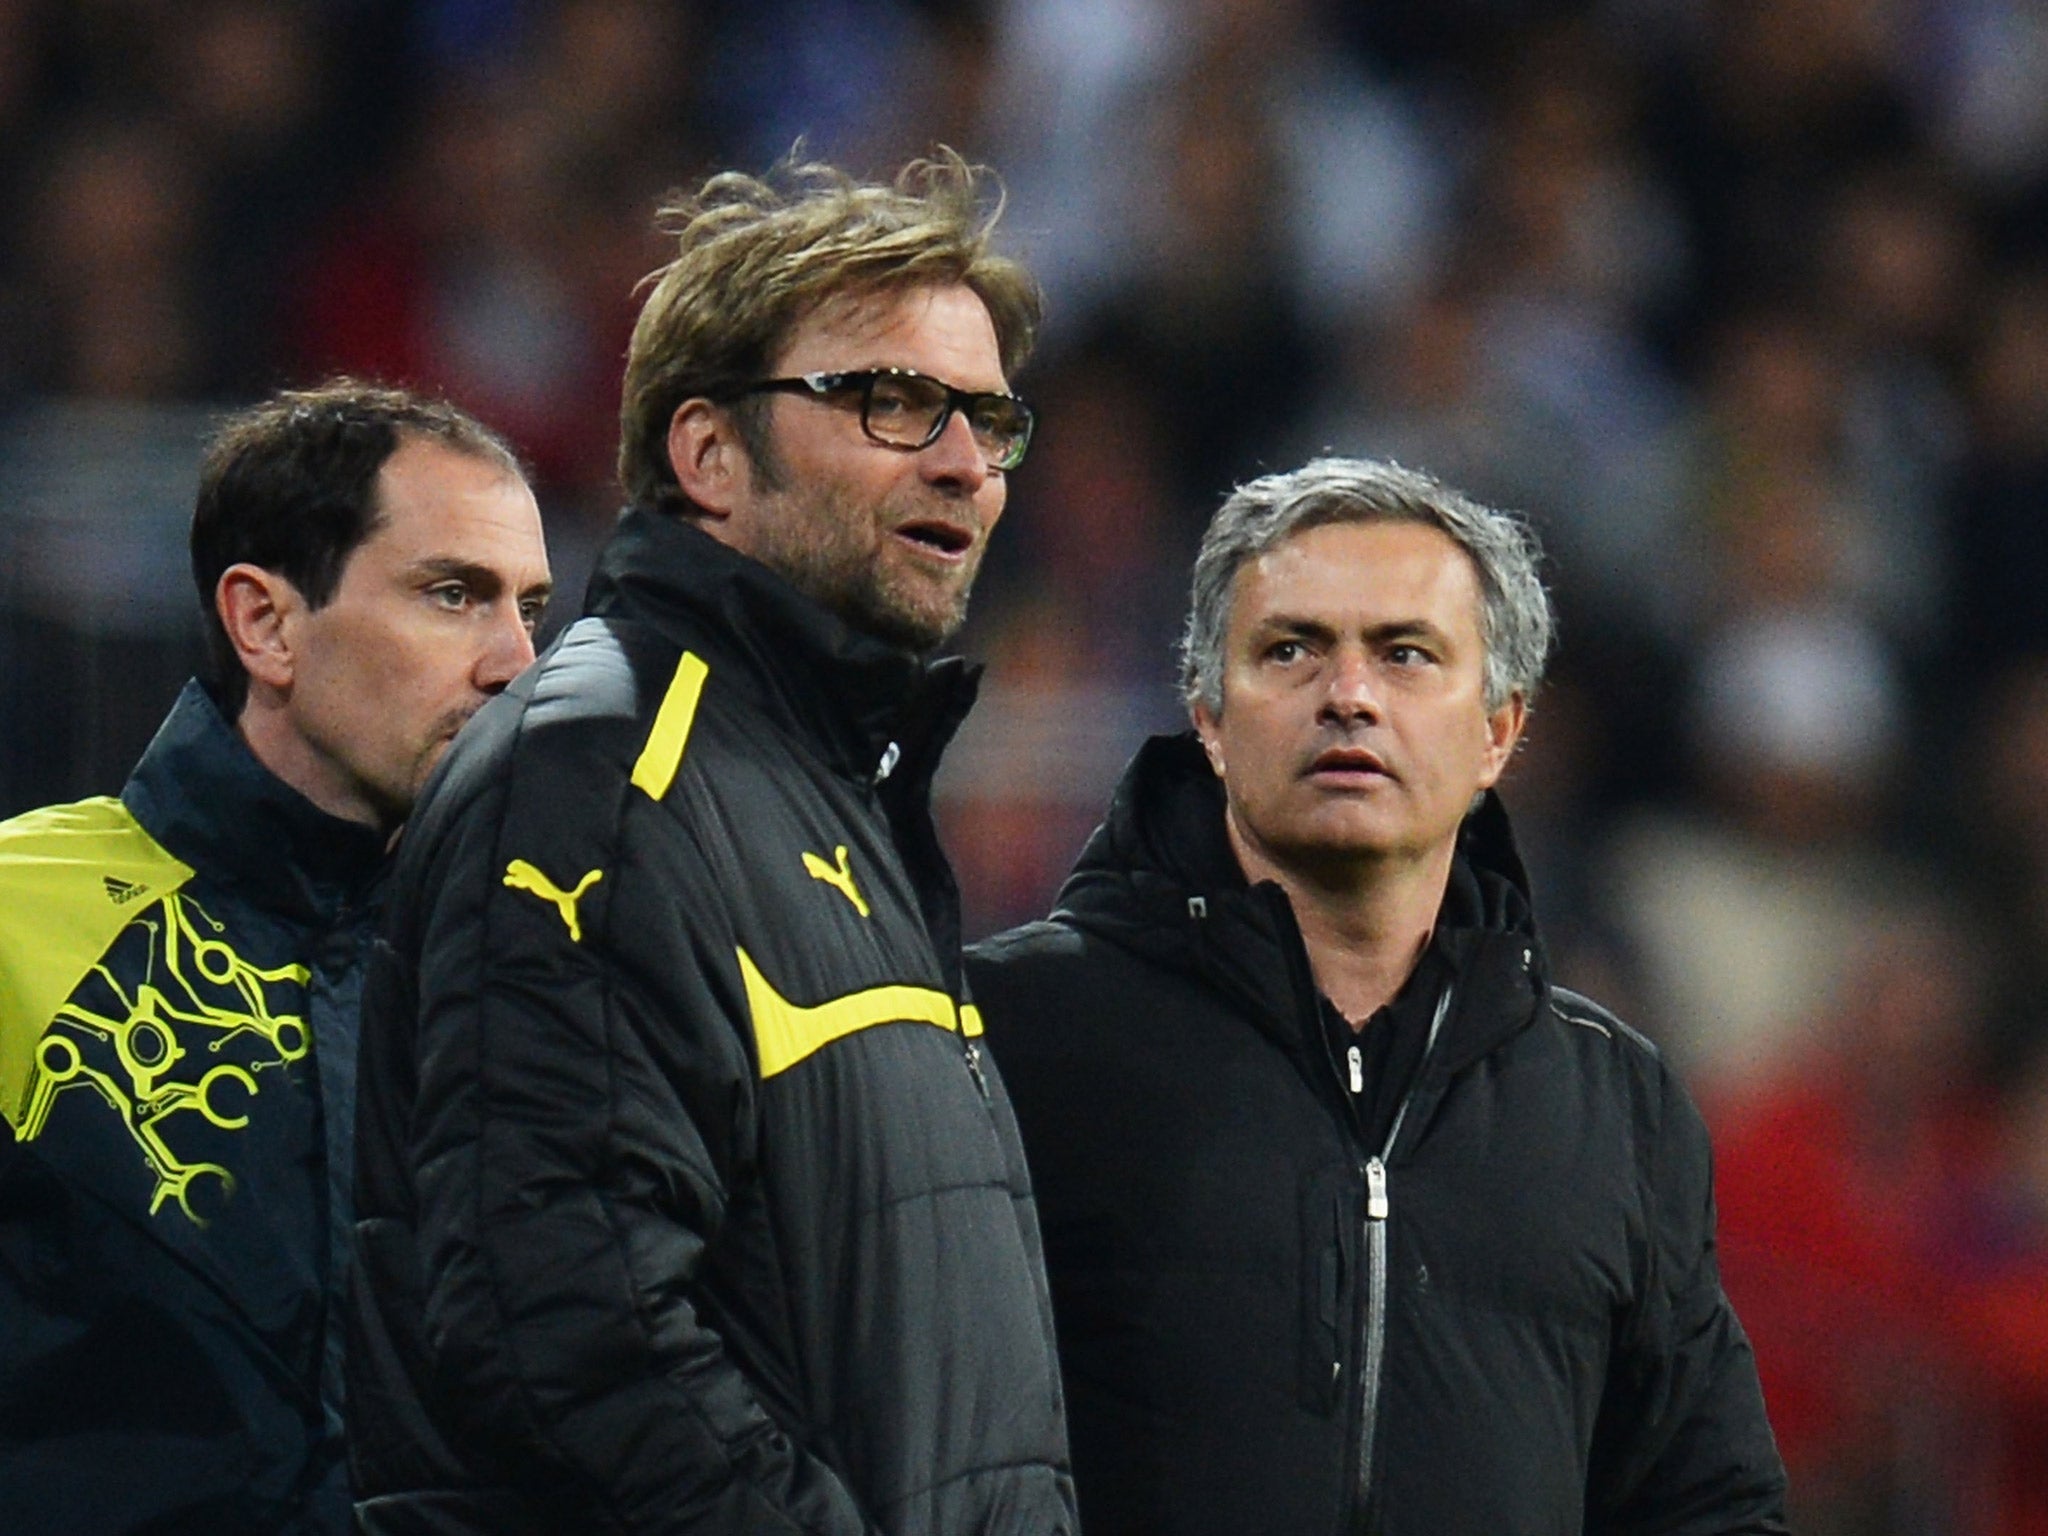 Jurgen Klopp and Jose Mourinho clash for the first time as Liverpool and Manchester United managers